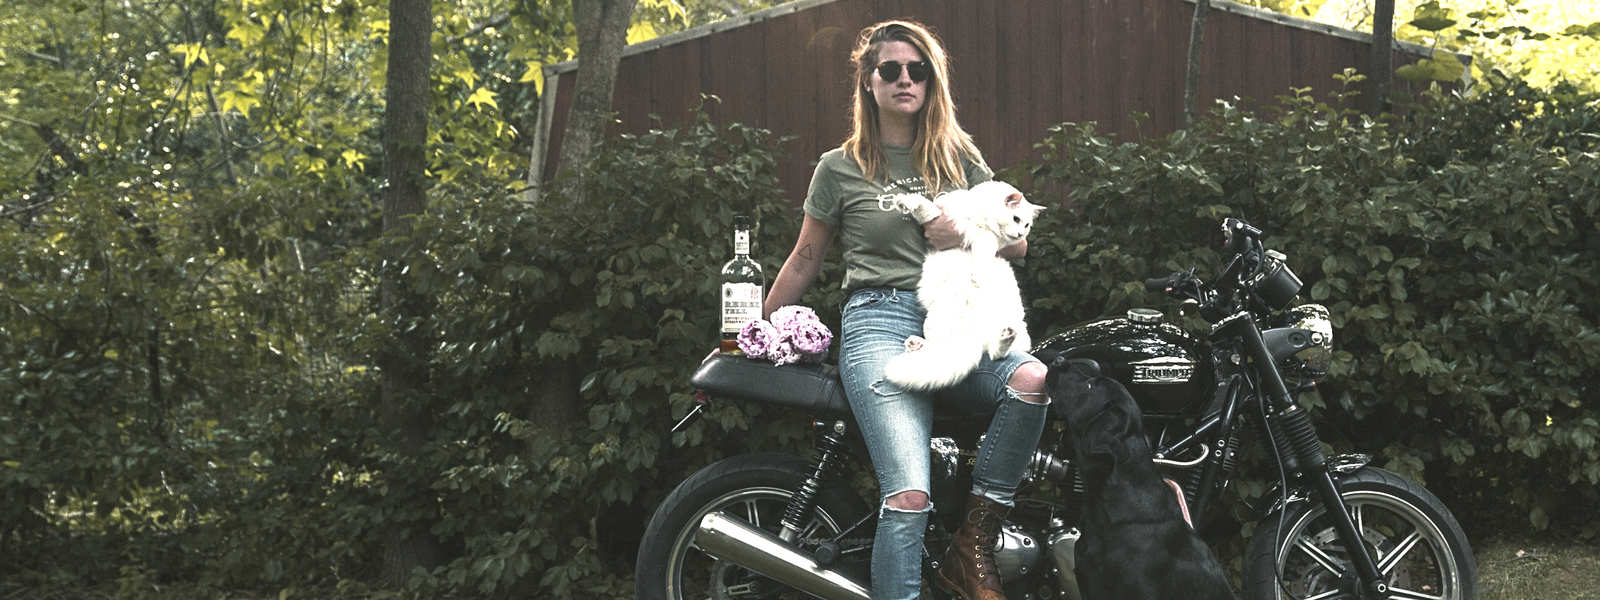 Katie, cats, and motorcycles